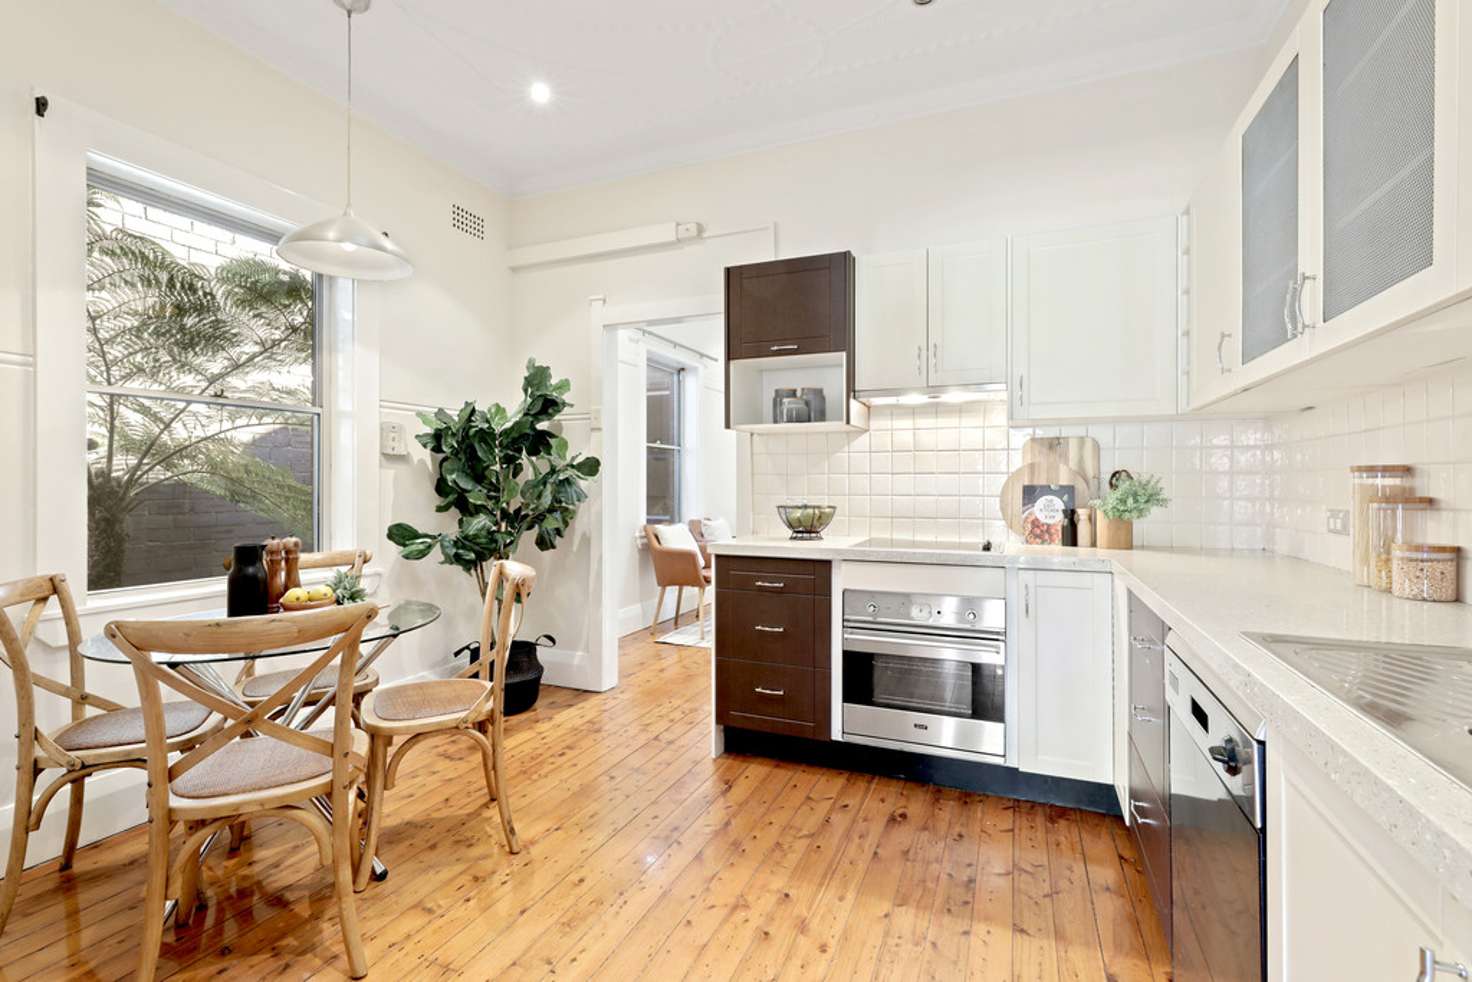 Main view of Homely house listing, 4 Swinbourne Street, Botany NSW 2019